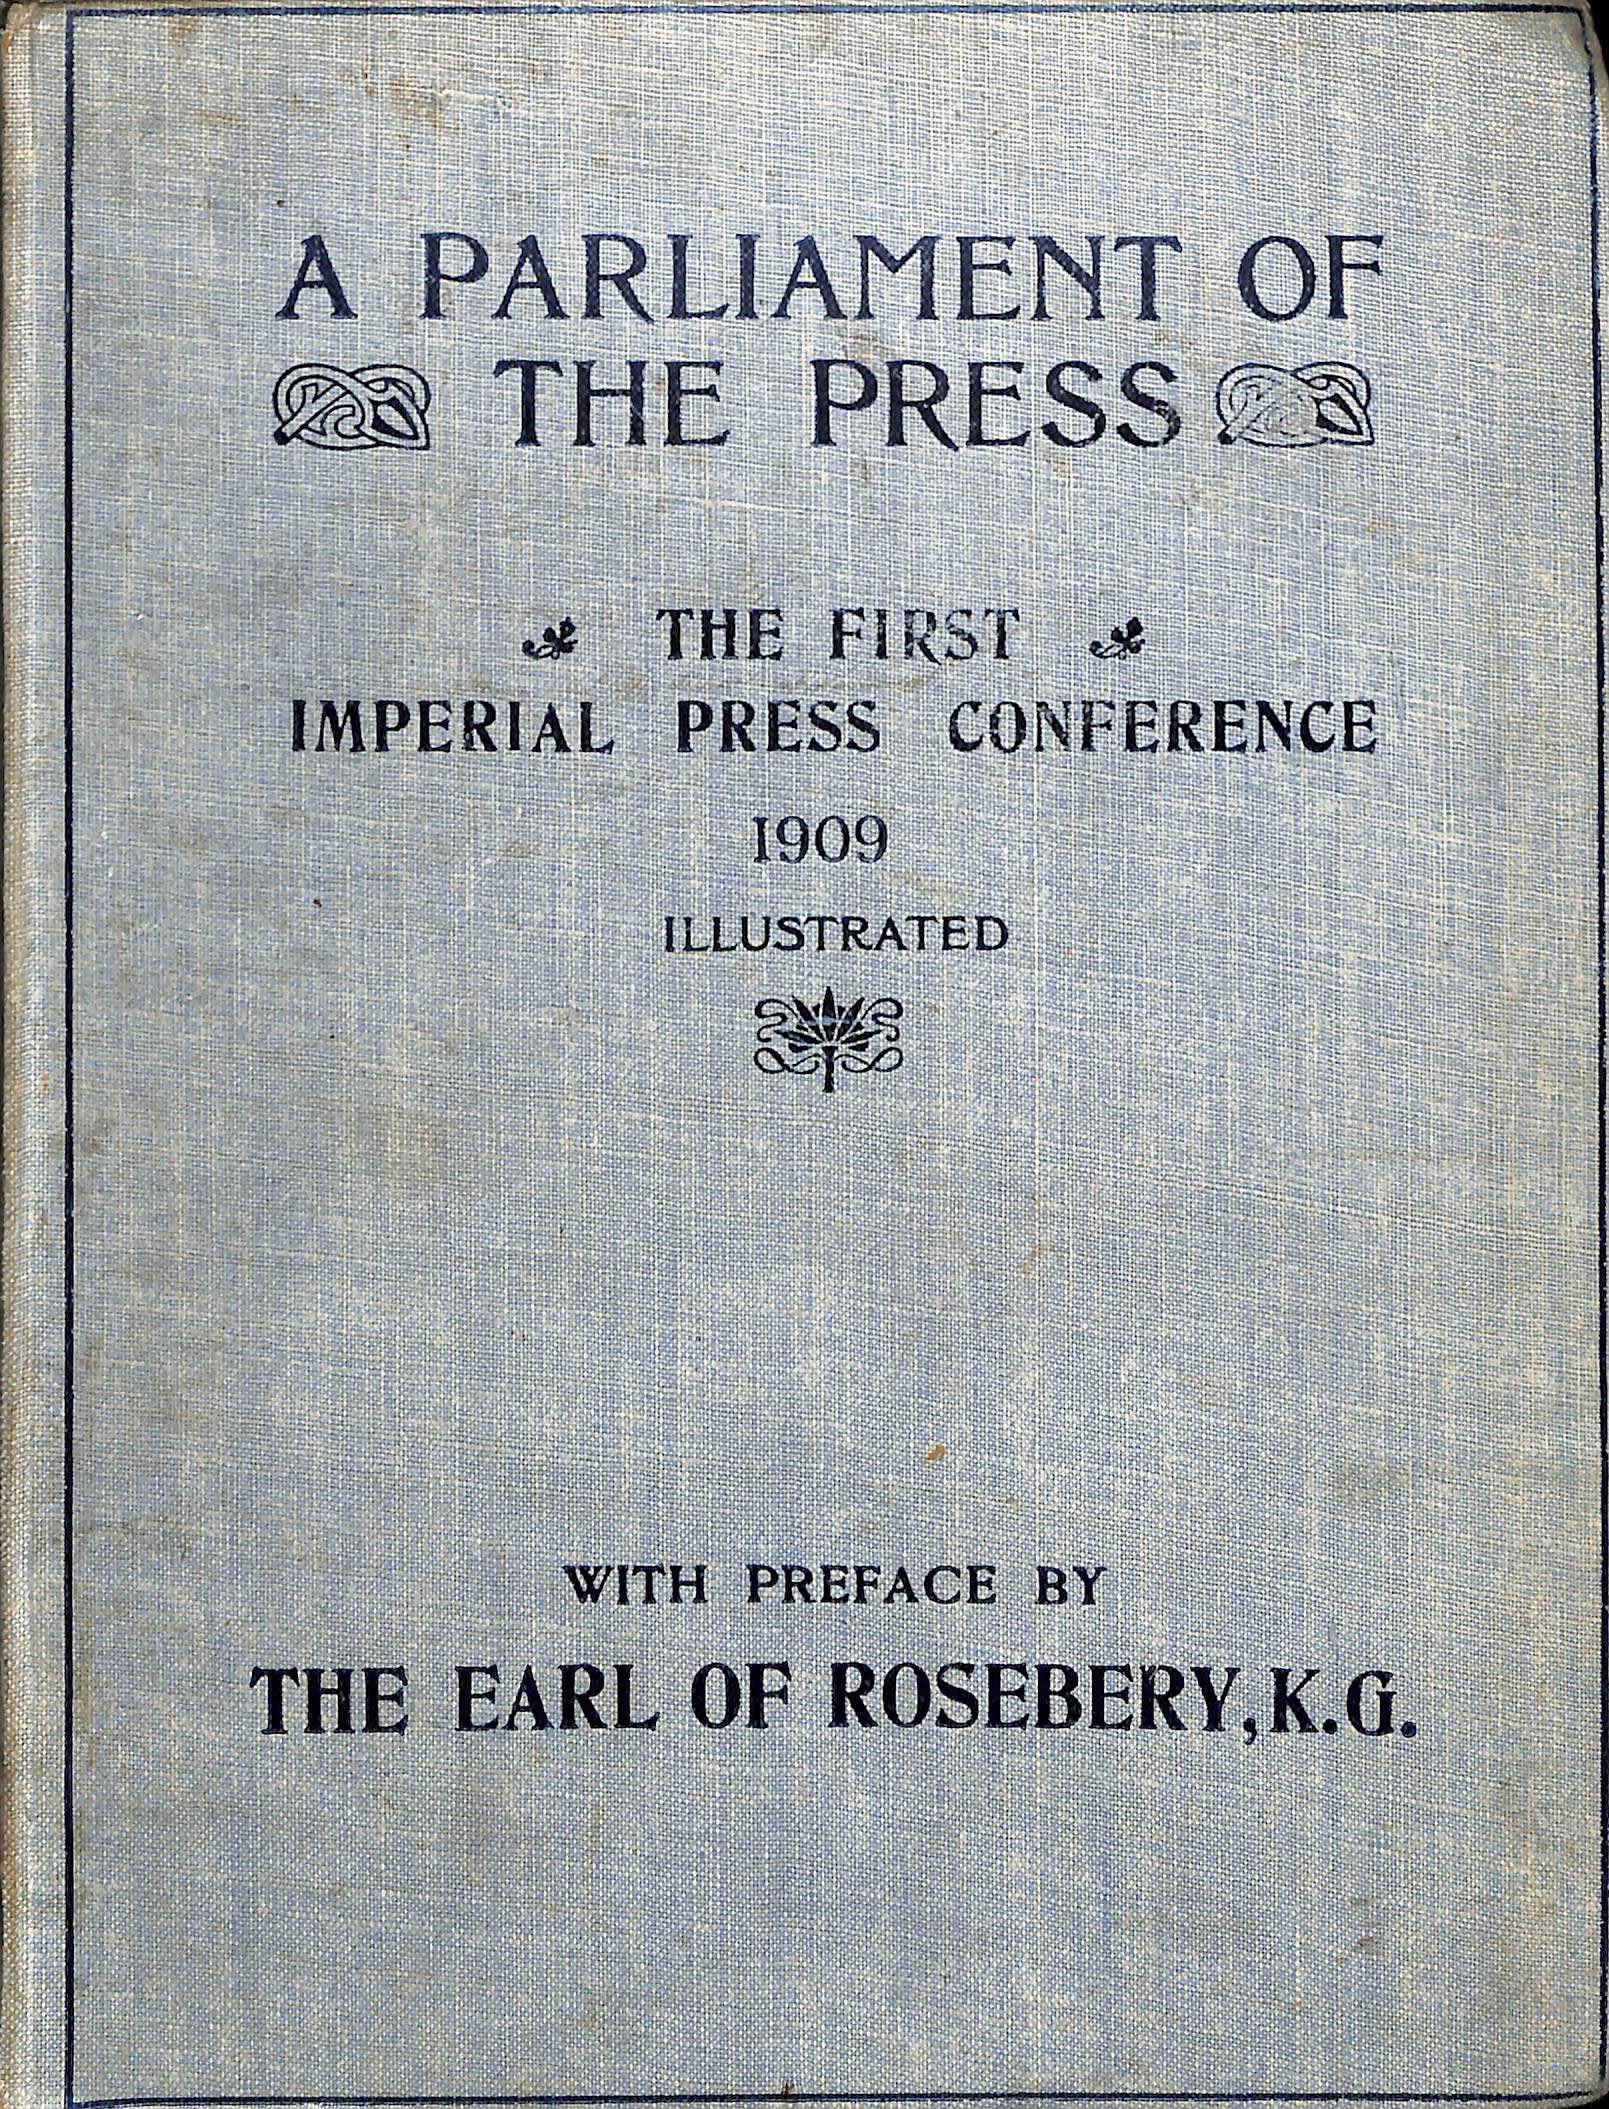 Thomas H. Hardman, ed. pub. (Jun. 05-26, 1909). A PARLIAMENT OF THE PRESS - THE FIRST IMPERIAL PRESS CONFERENCE, 1909, Illustrated, with Preface by The Earl of Rosebery, K.G. London: Horace Marshall & Son.